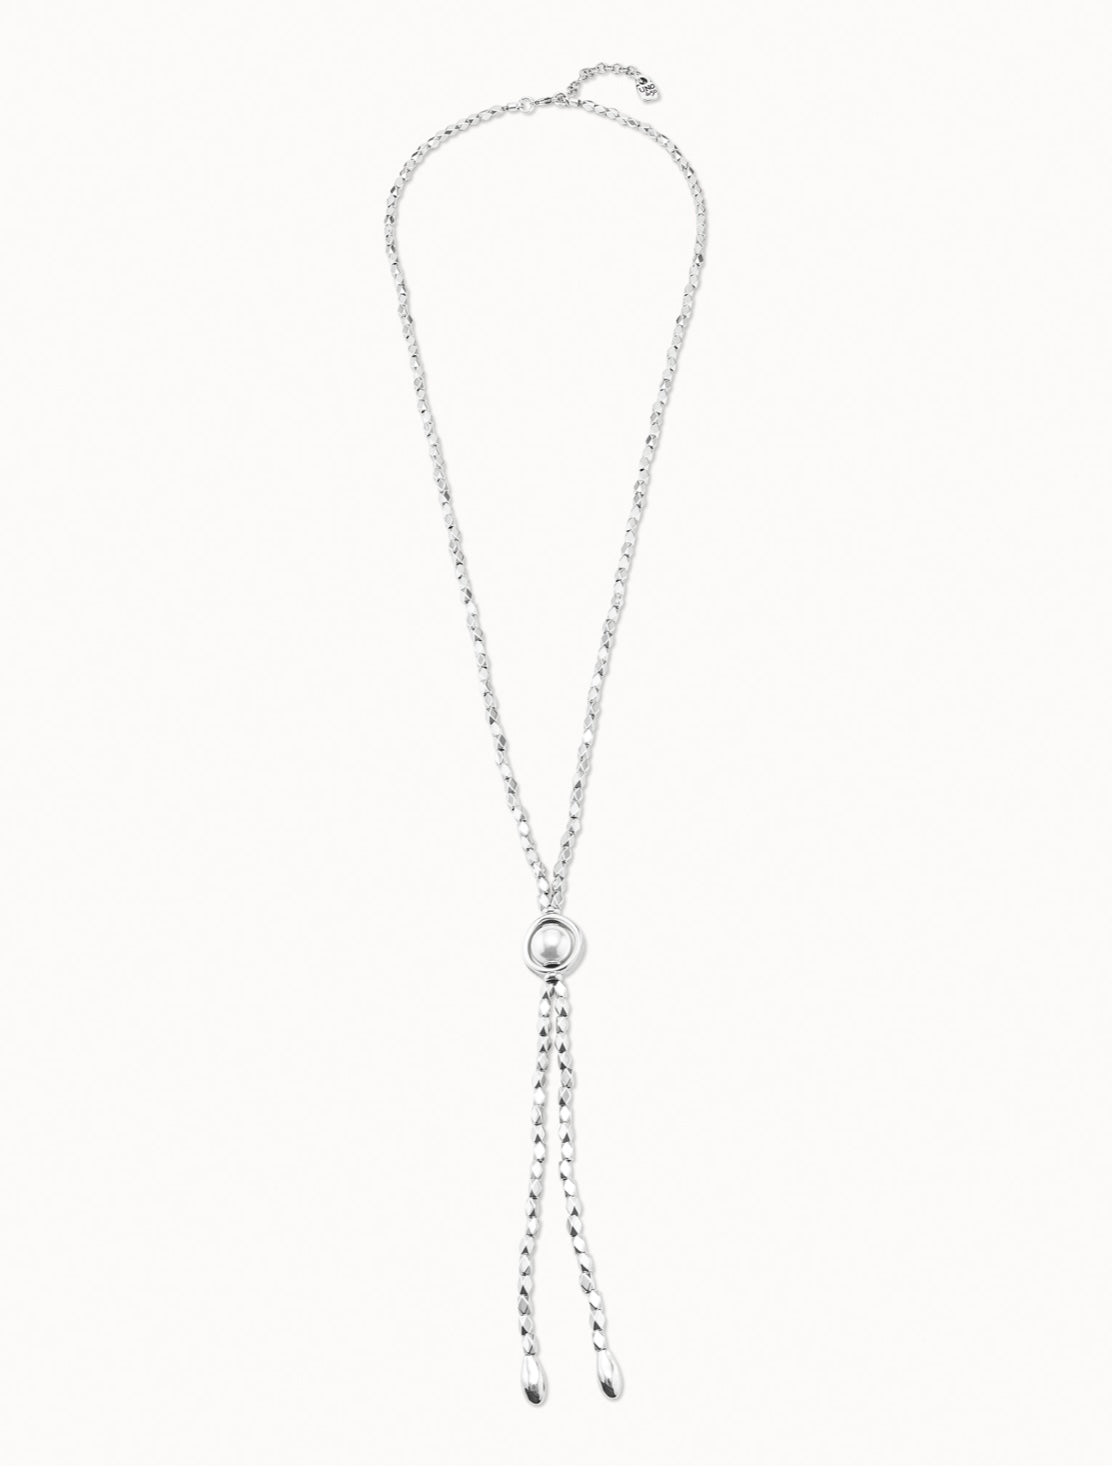 Make a Wish Necklace - Silver